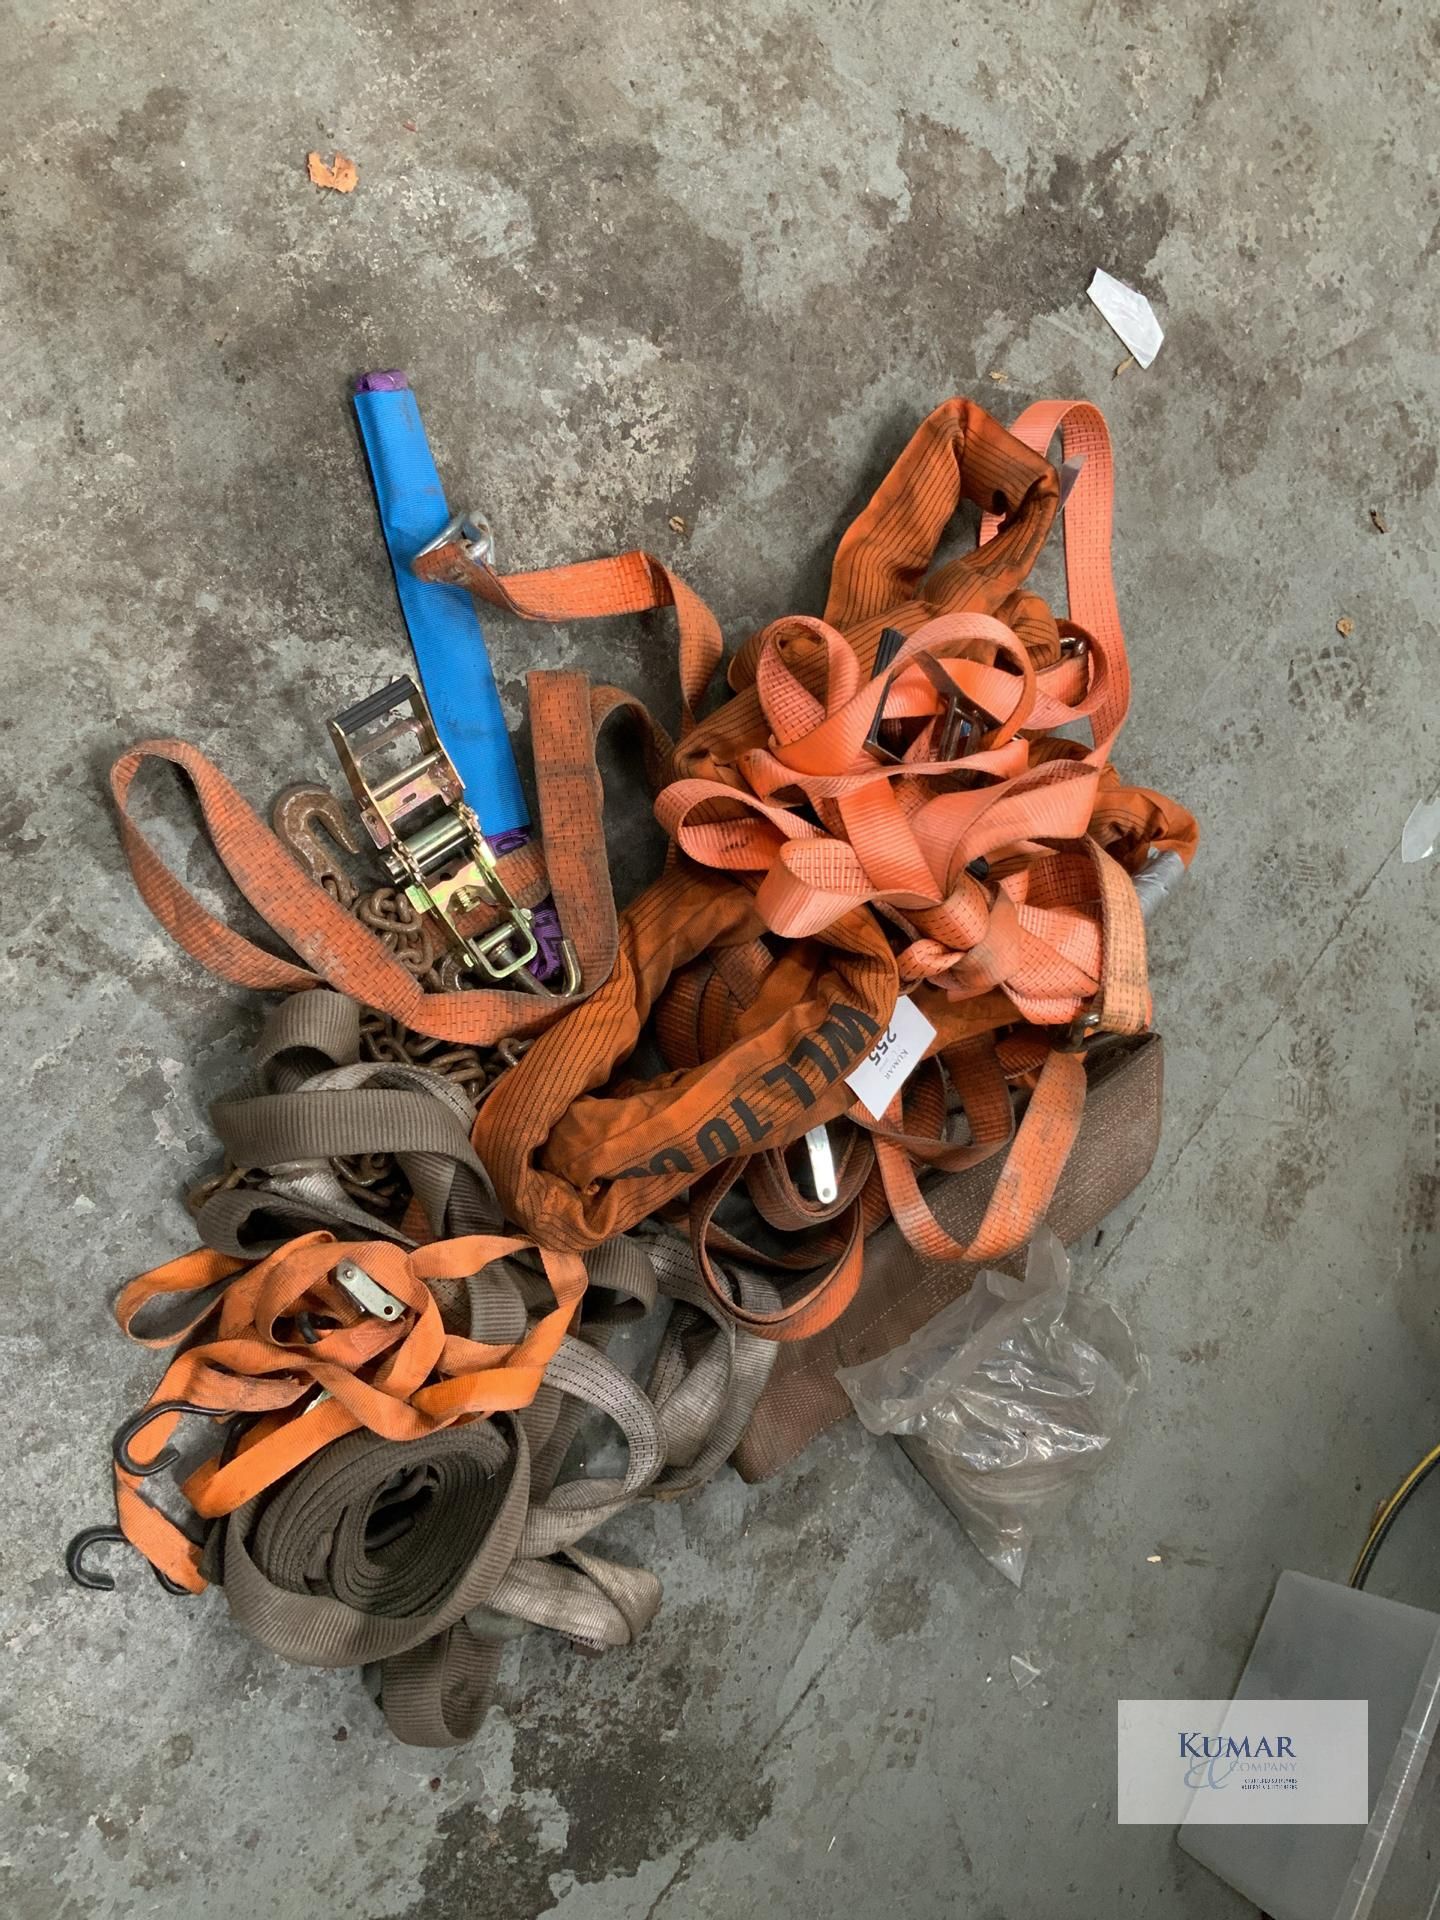 Large Quantity Ratchet Straps & Slings As Shown - Image 3 of 3